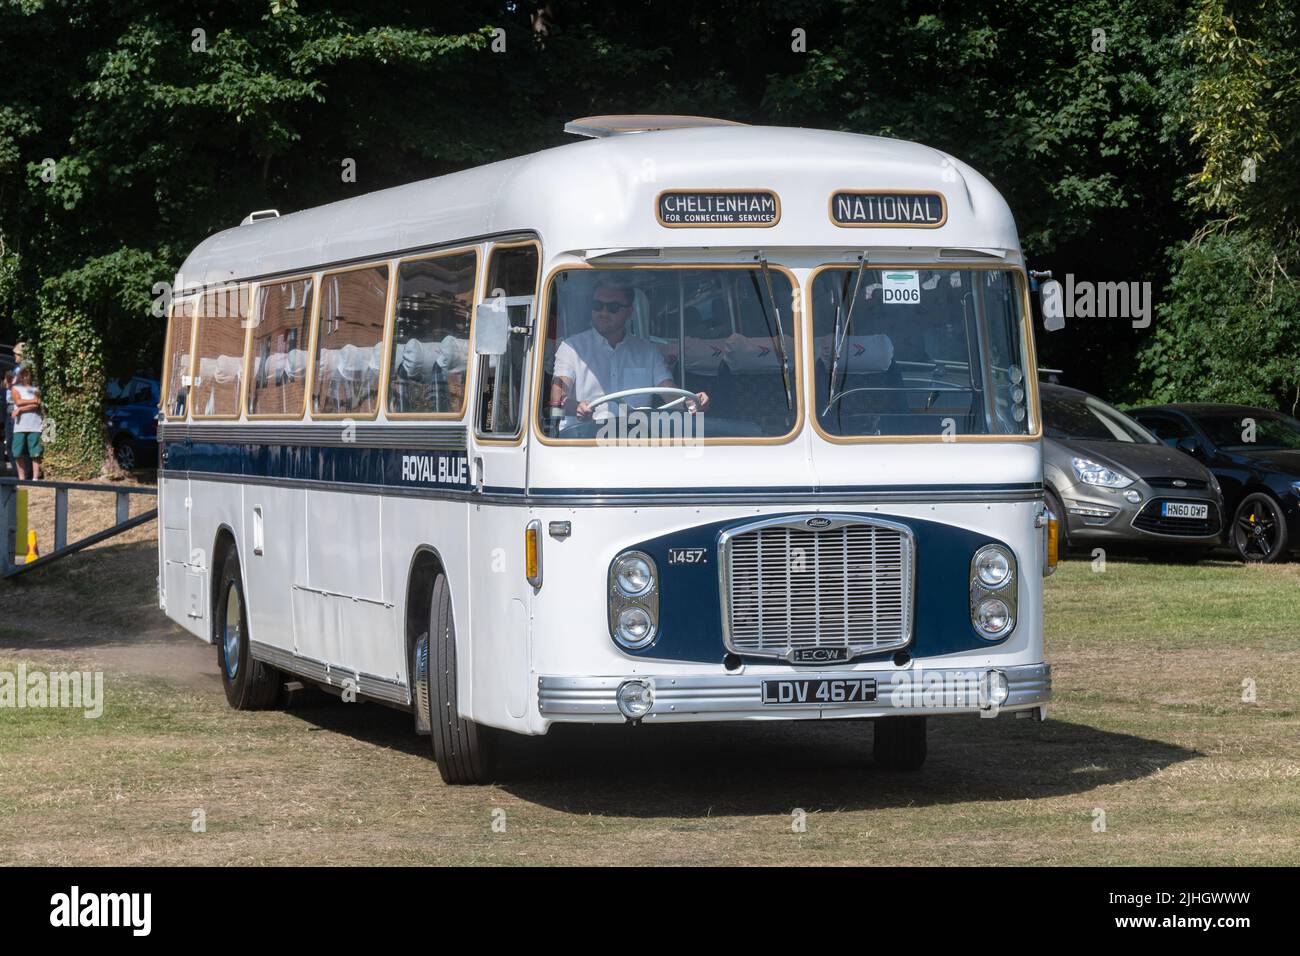 Vintage1968 Bristol (BLMC) Royal Blue coach at a transport event in Hampshire, England, UK Stock Photo